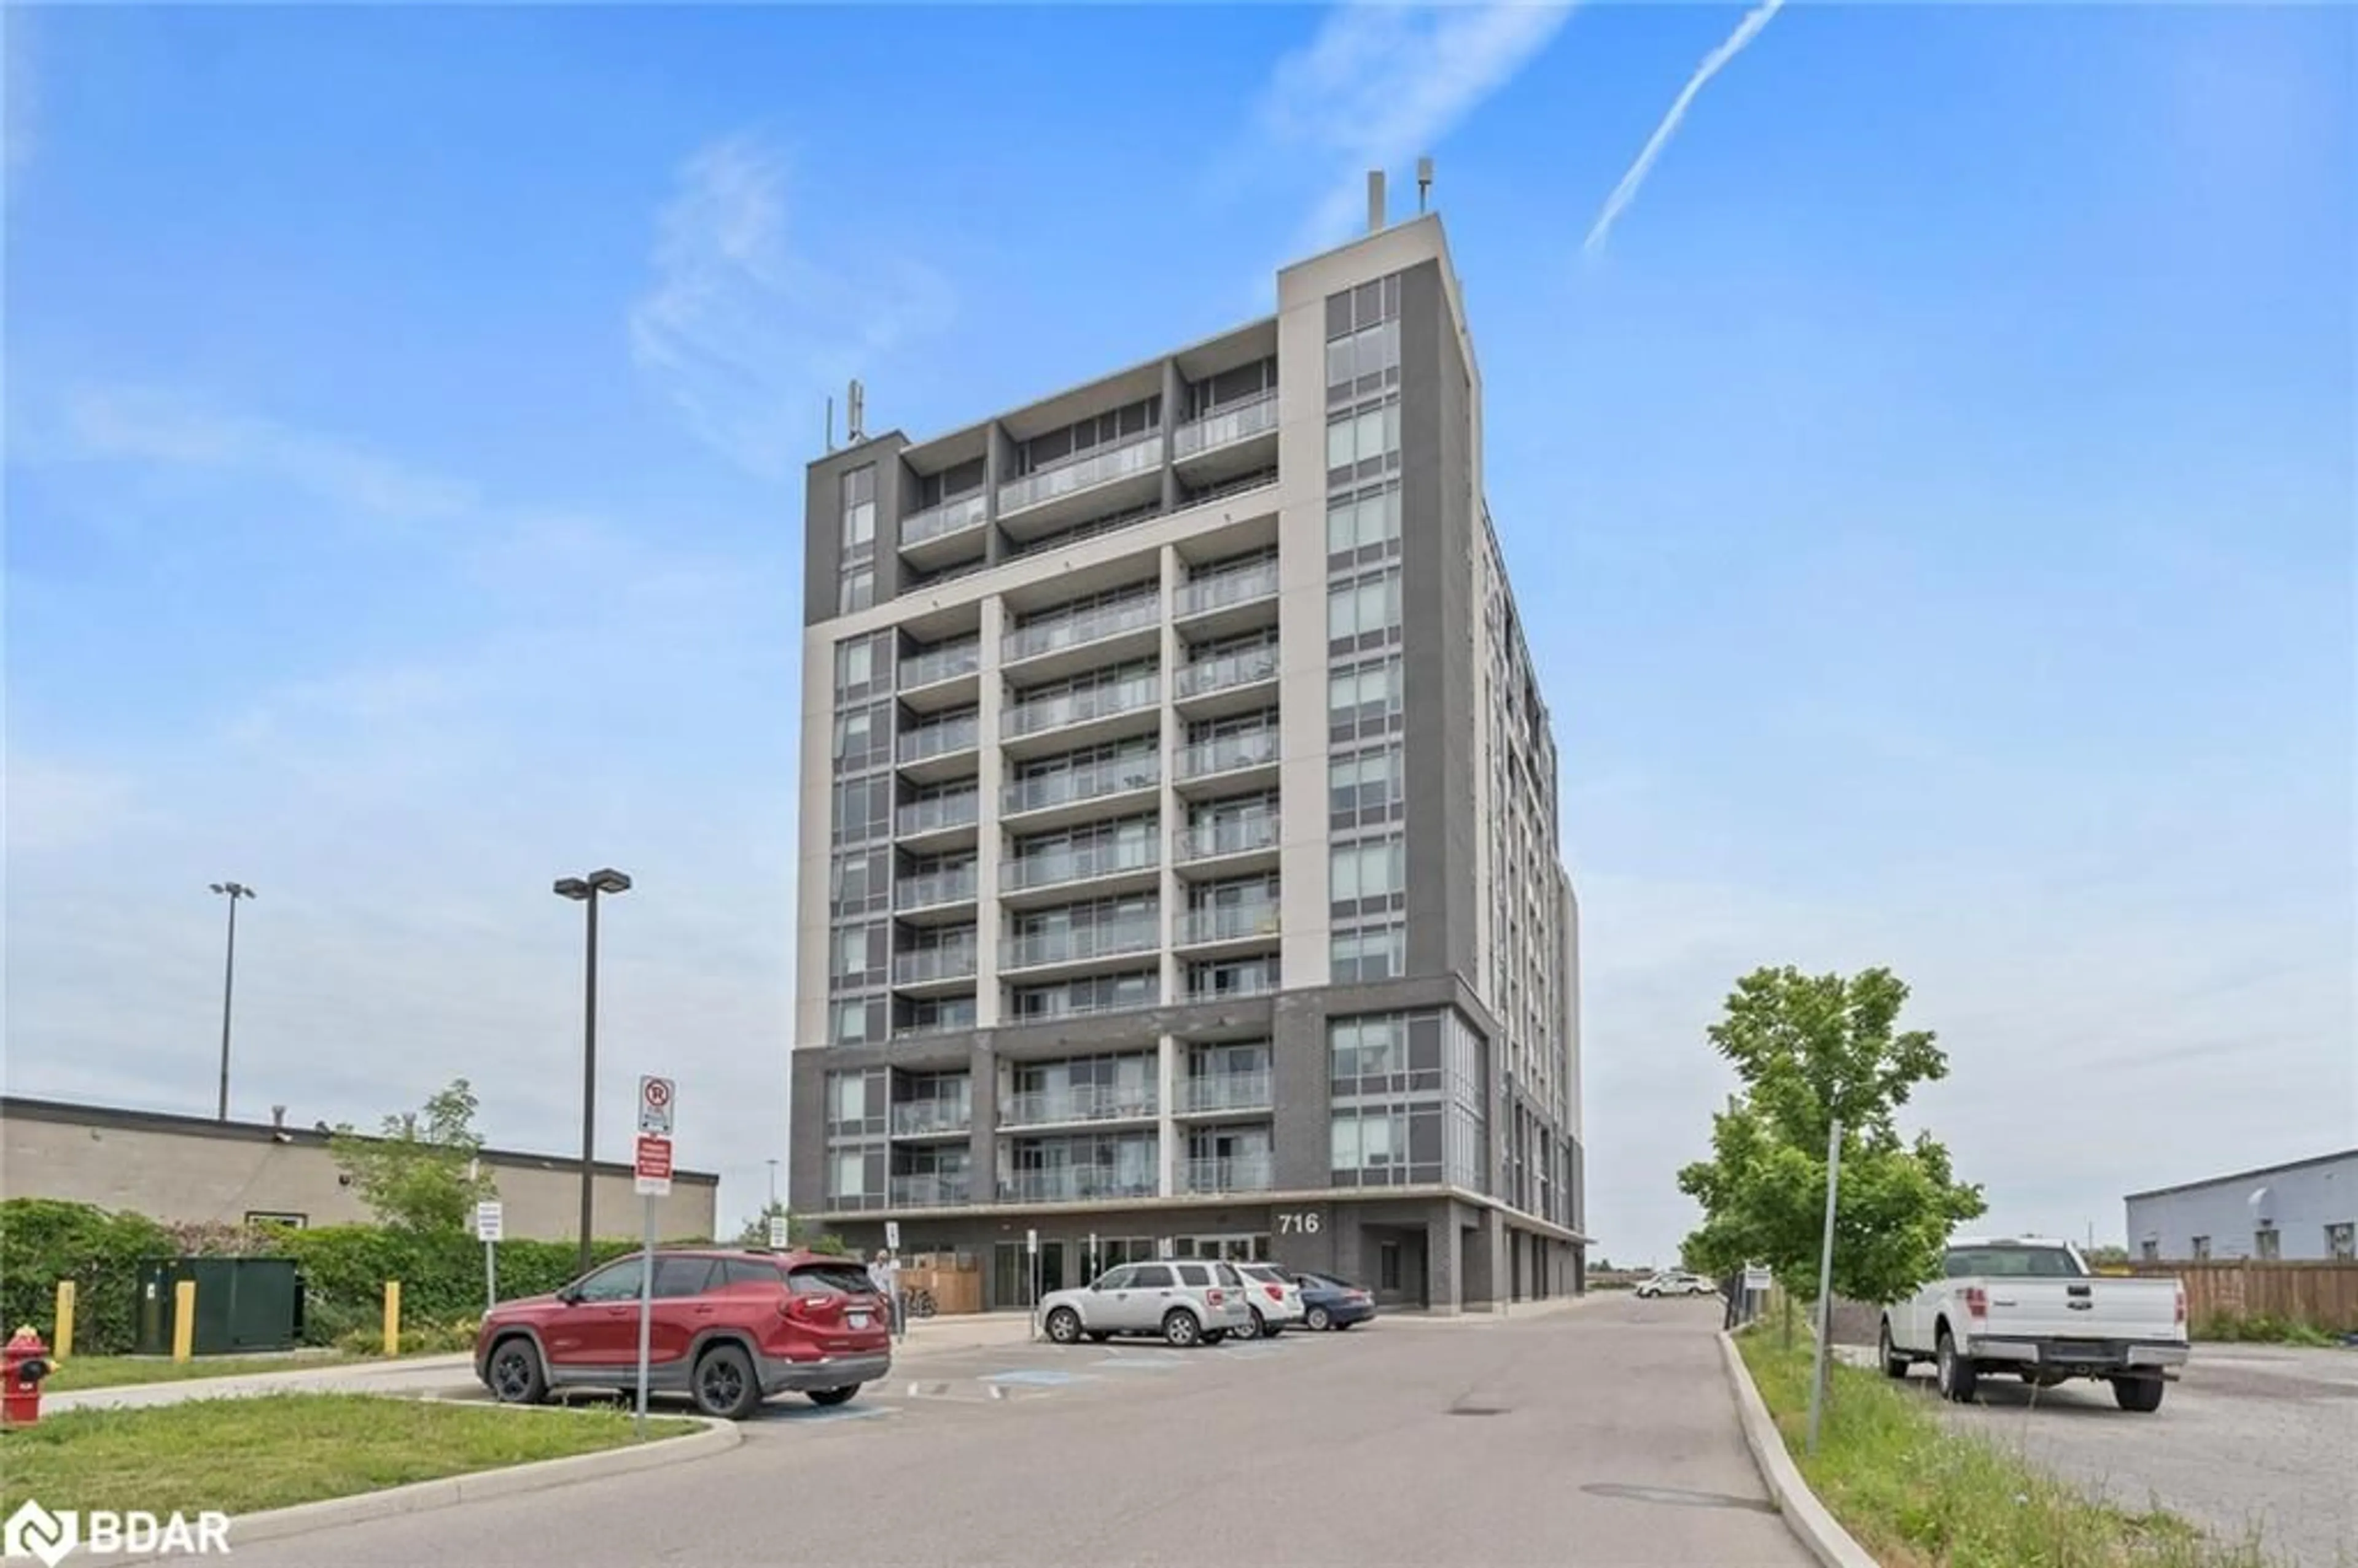 A pic from exterior of the house or condo for 716 Main St #207, Halton Ontario L9T 9L9